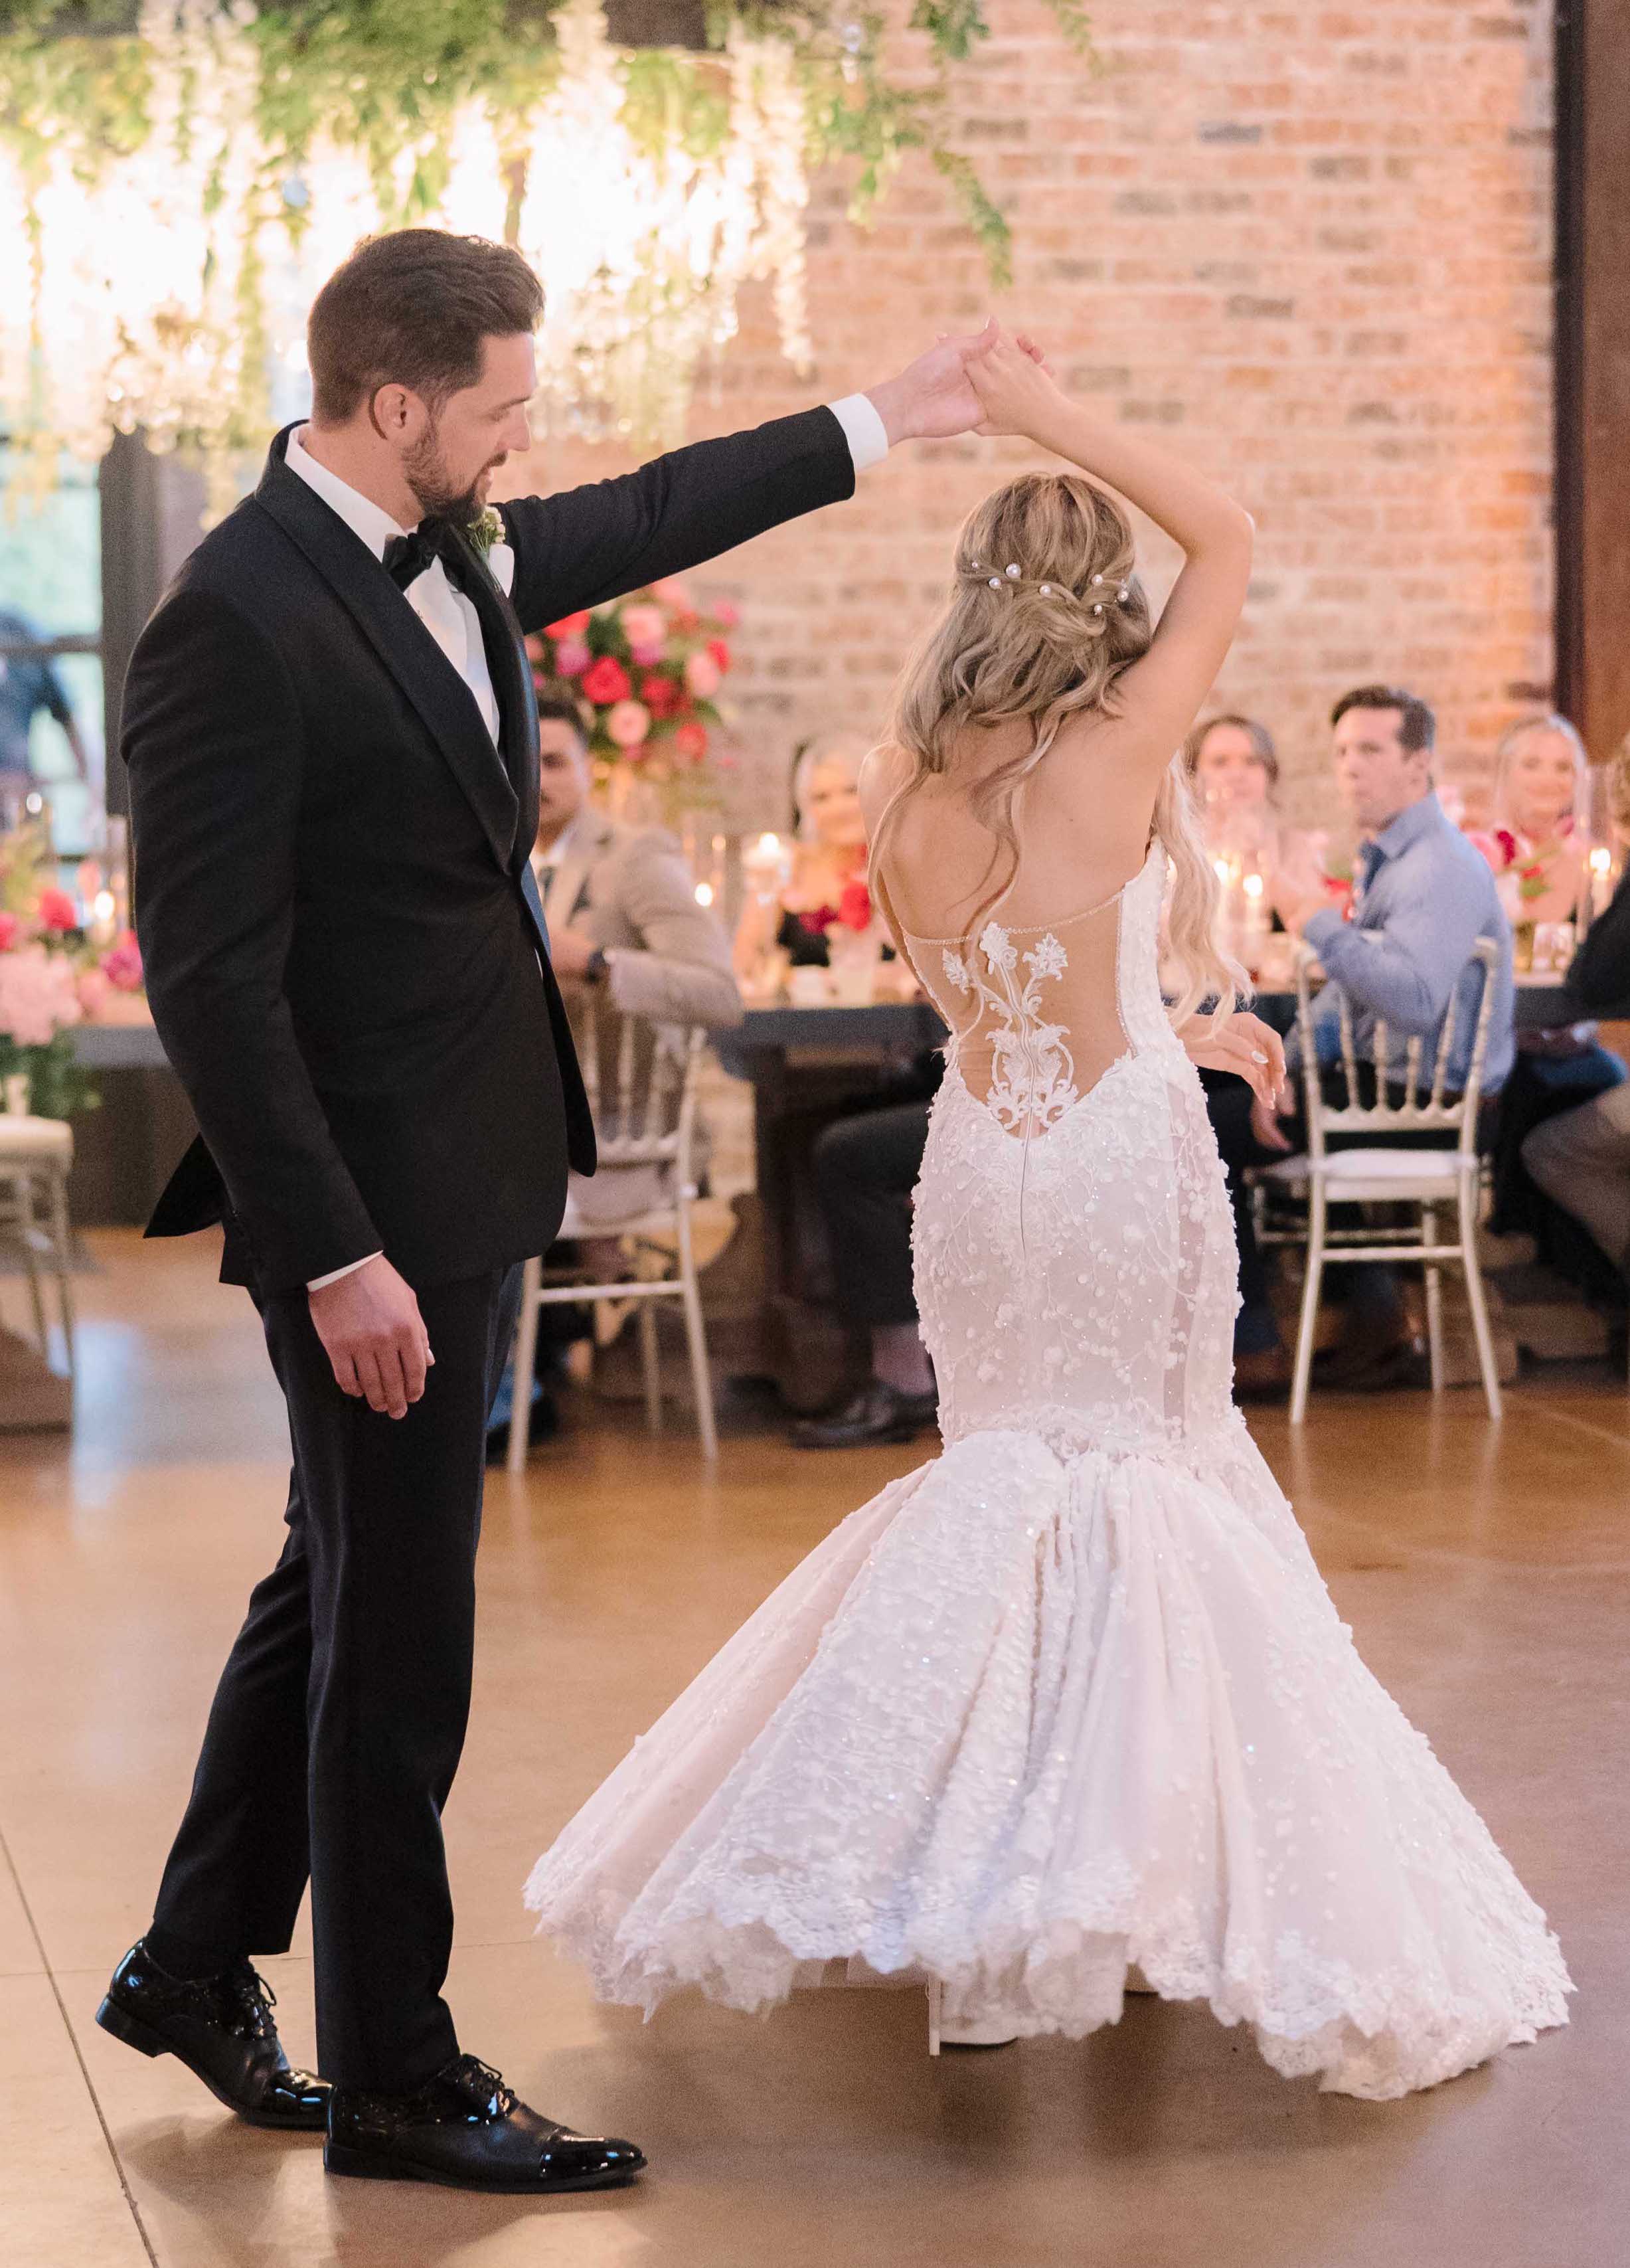 A groom twirls his bride on the dance floor during their wedding reception in Conroe, TX.